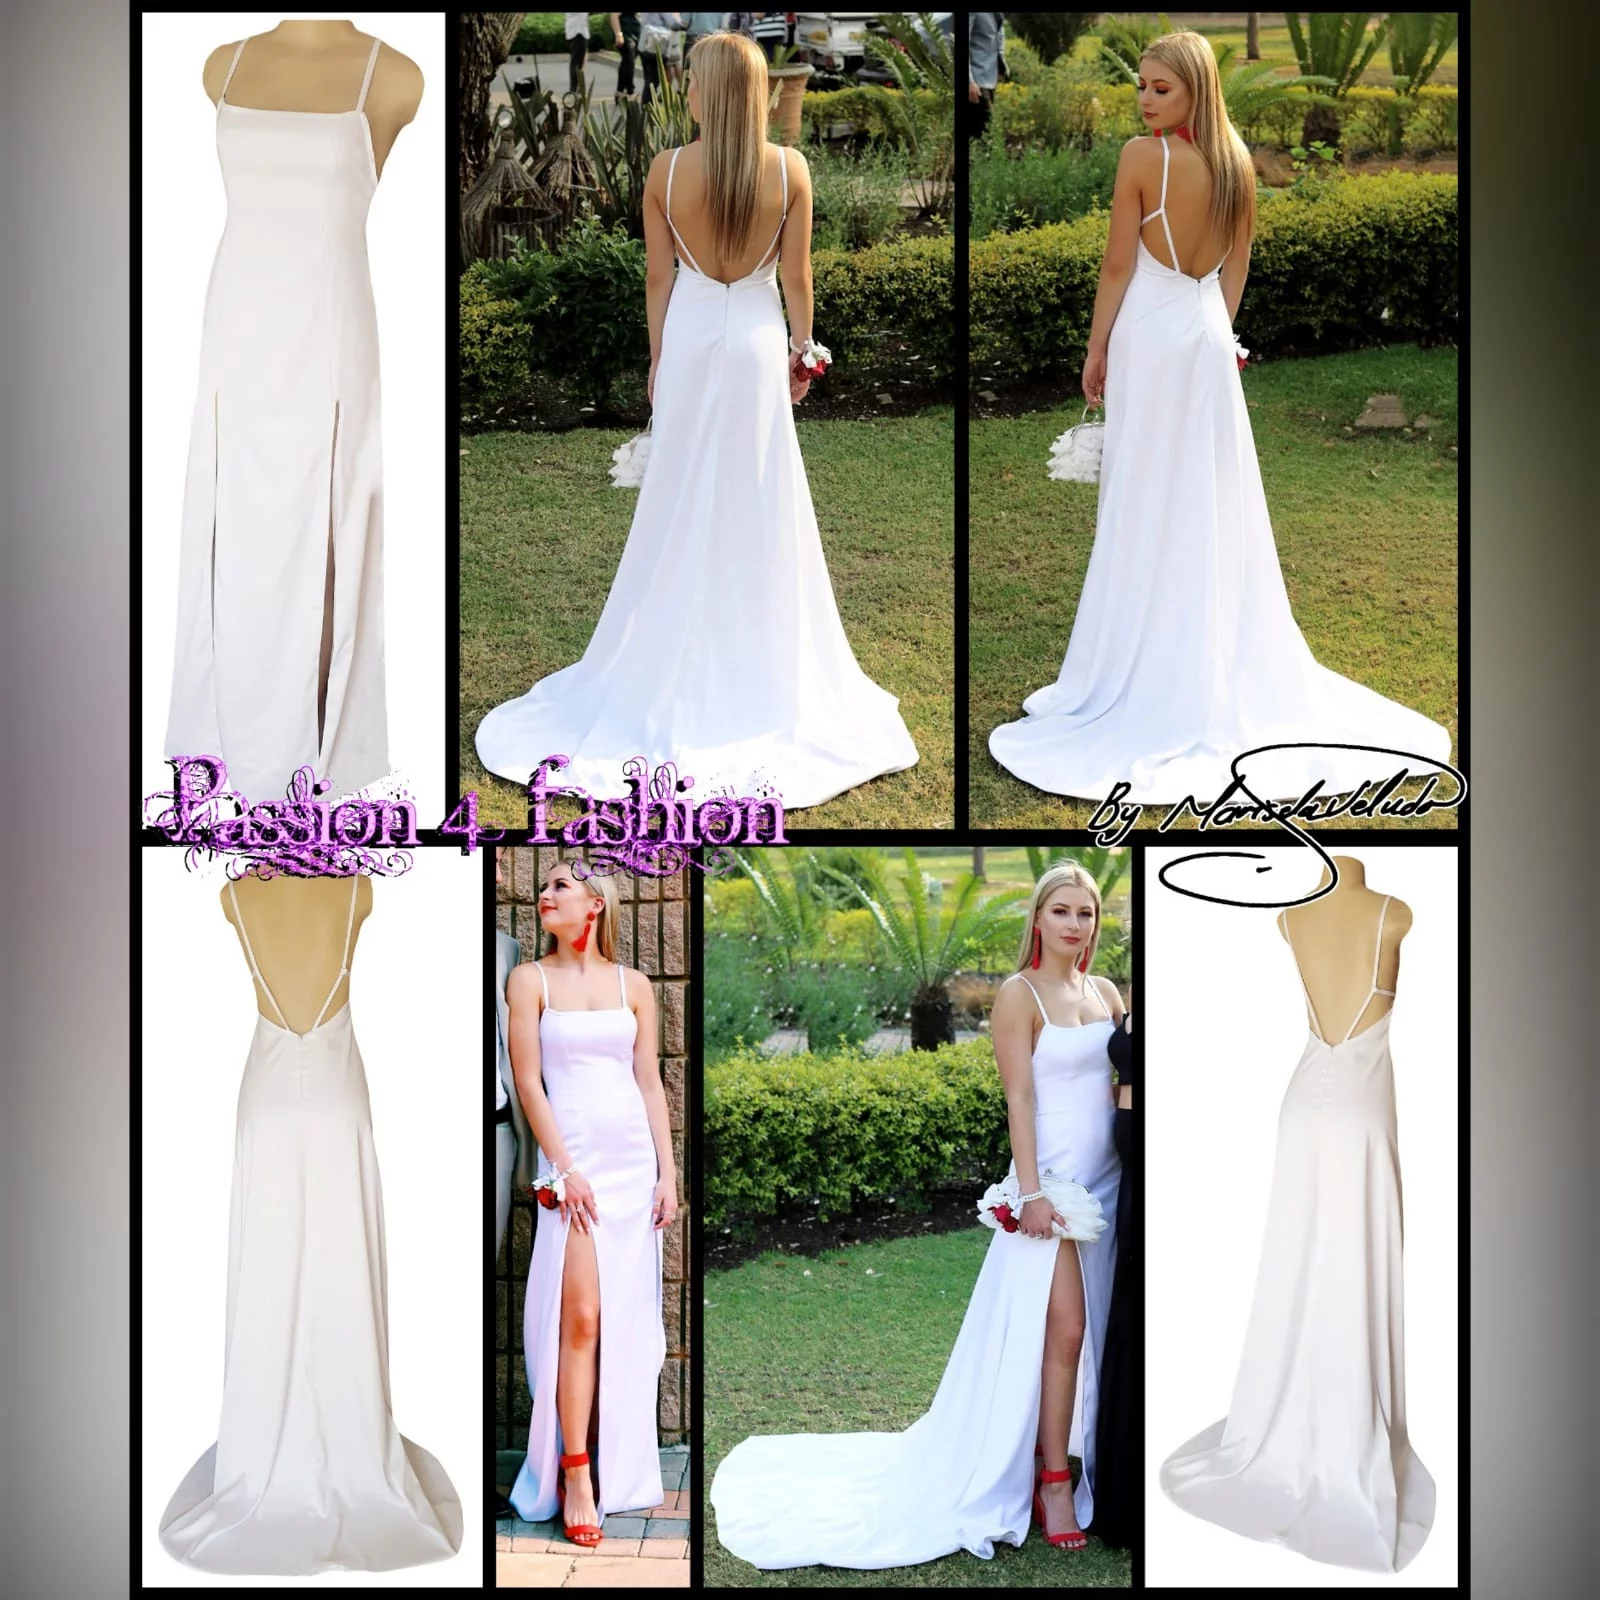 White satin long prom dress with a low open back 8 white satin long prom dress with a low open back, with strap detail. Straight neckline, 2 slits and a train.